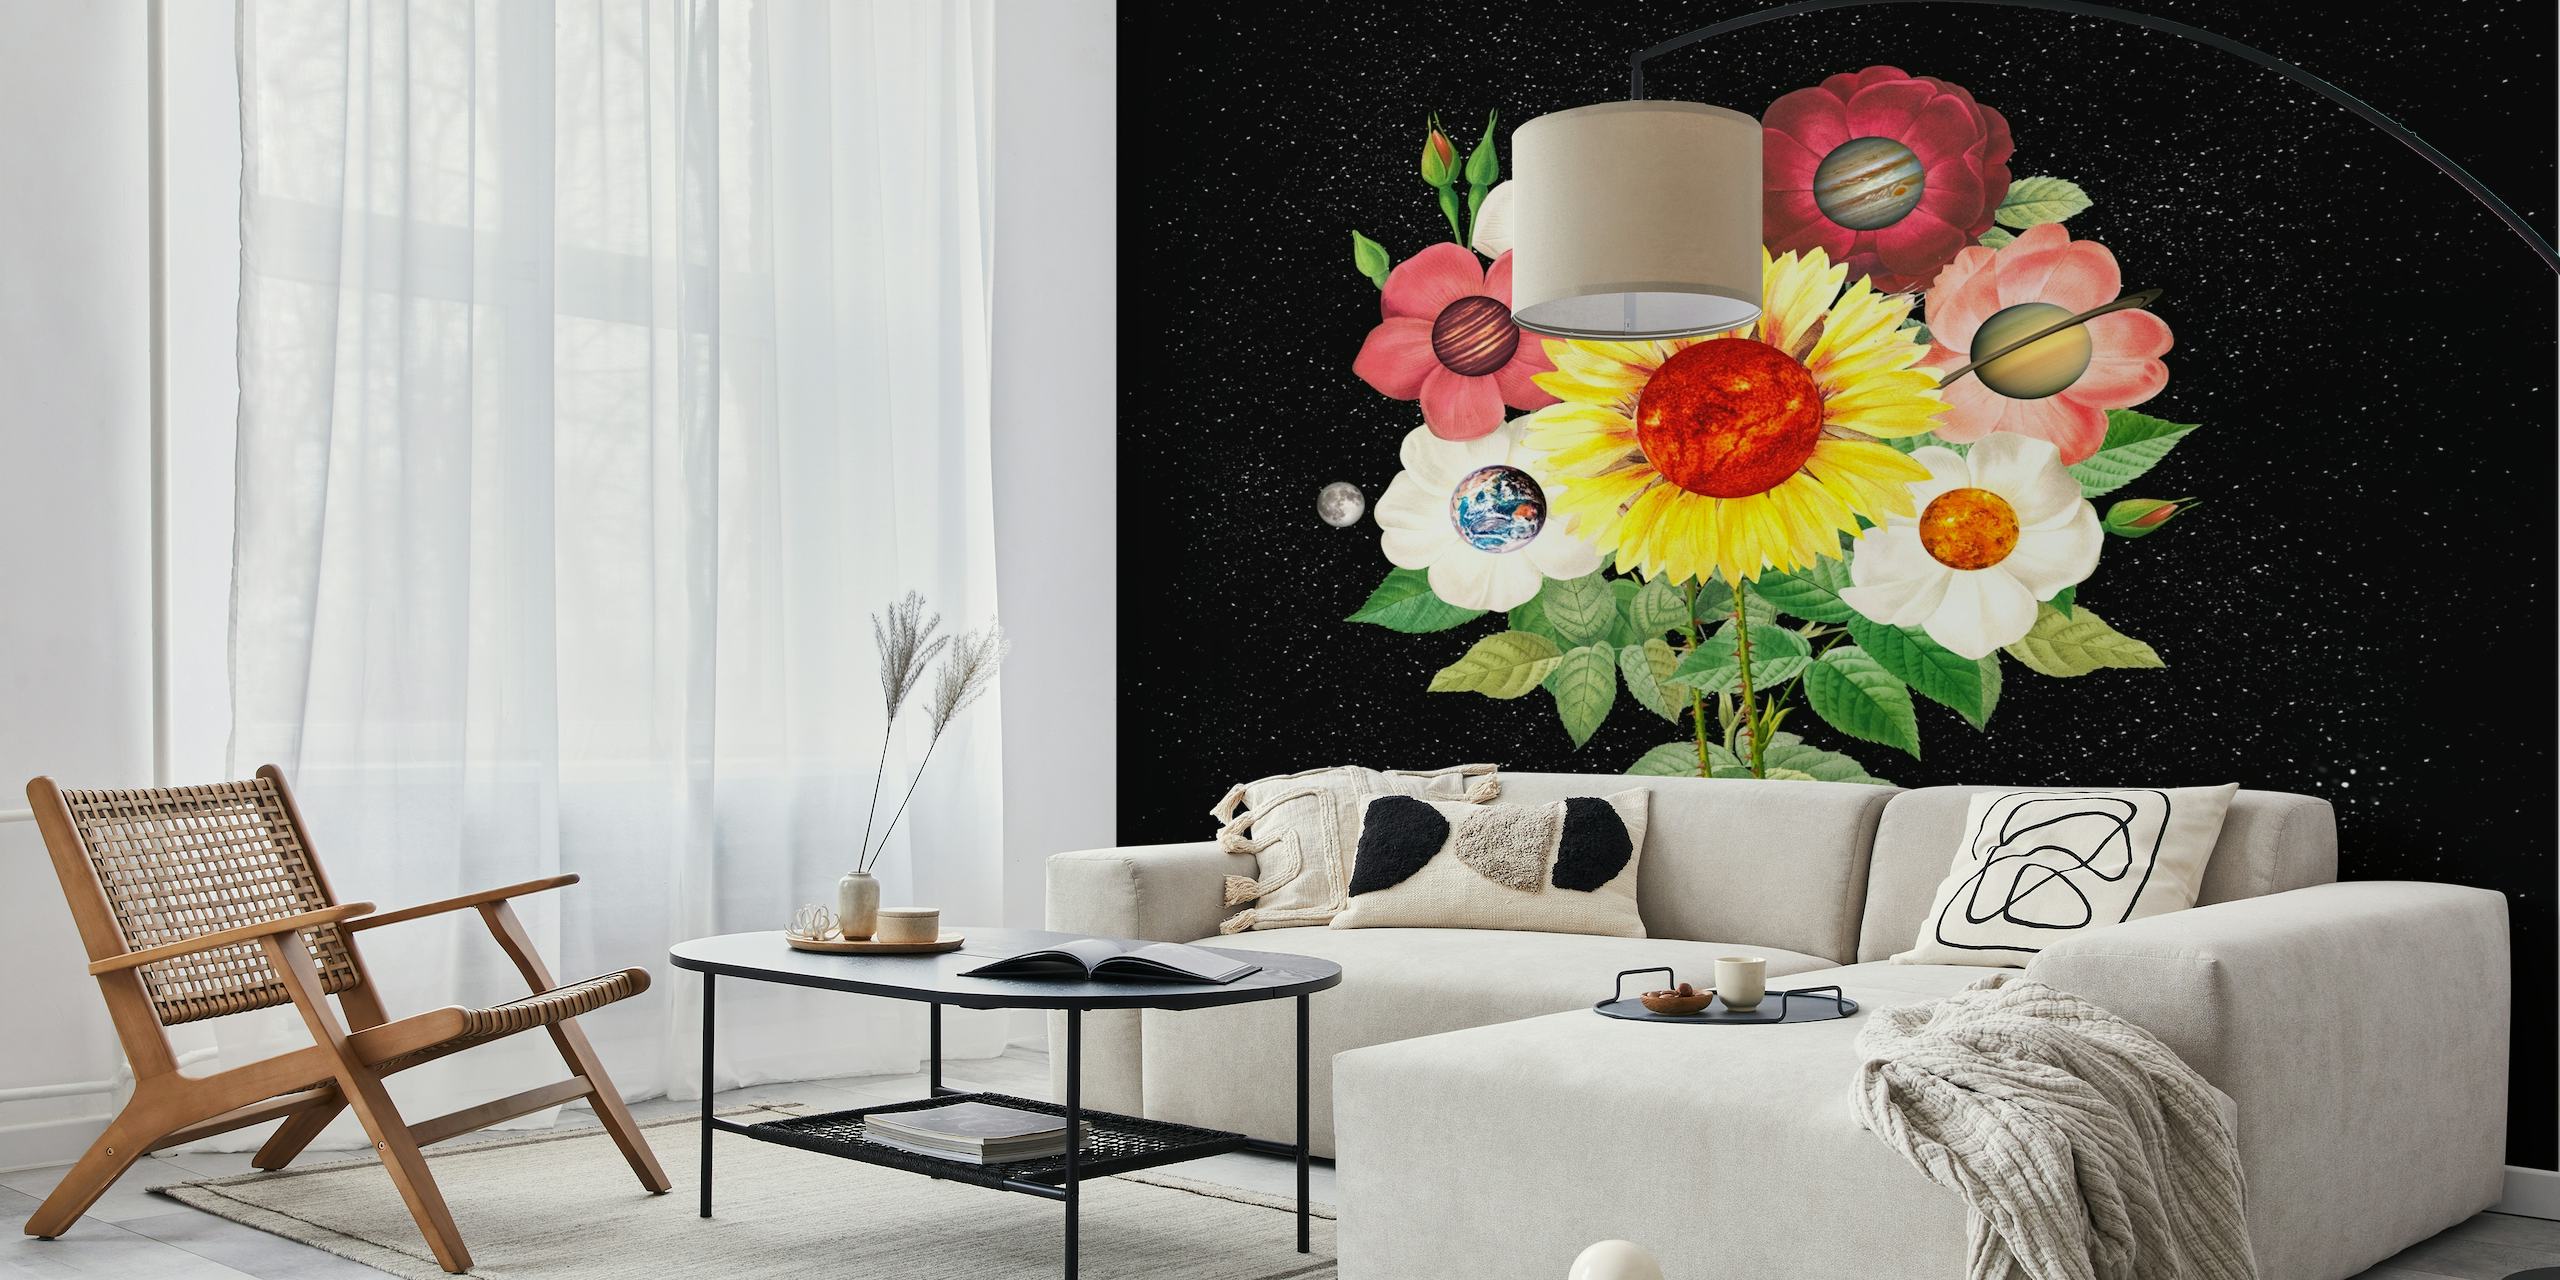 Artistic sunflower and planet mural on a starry background